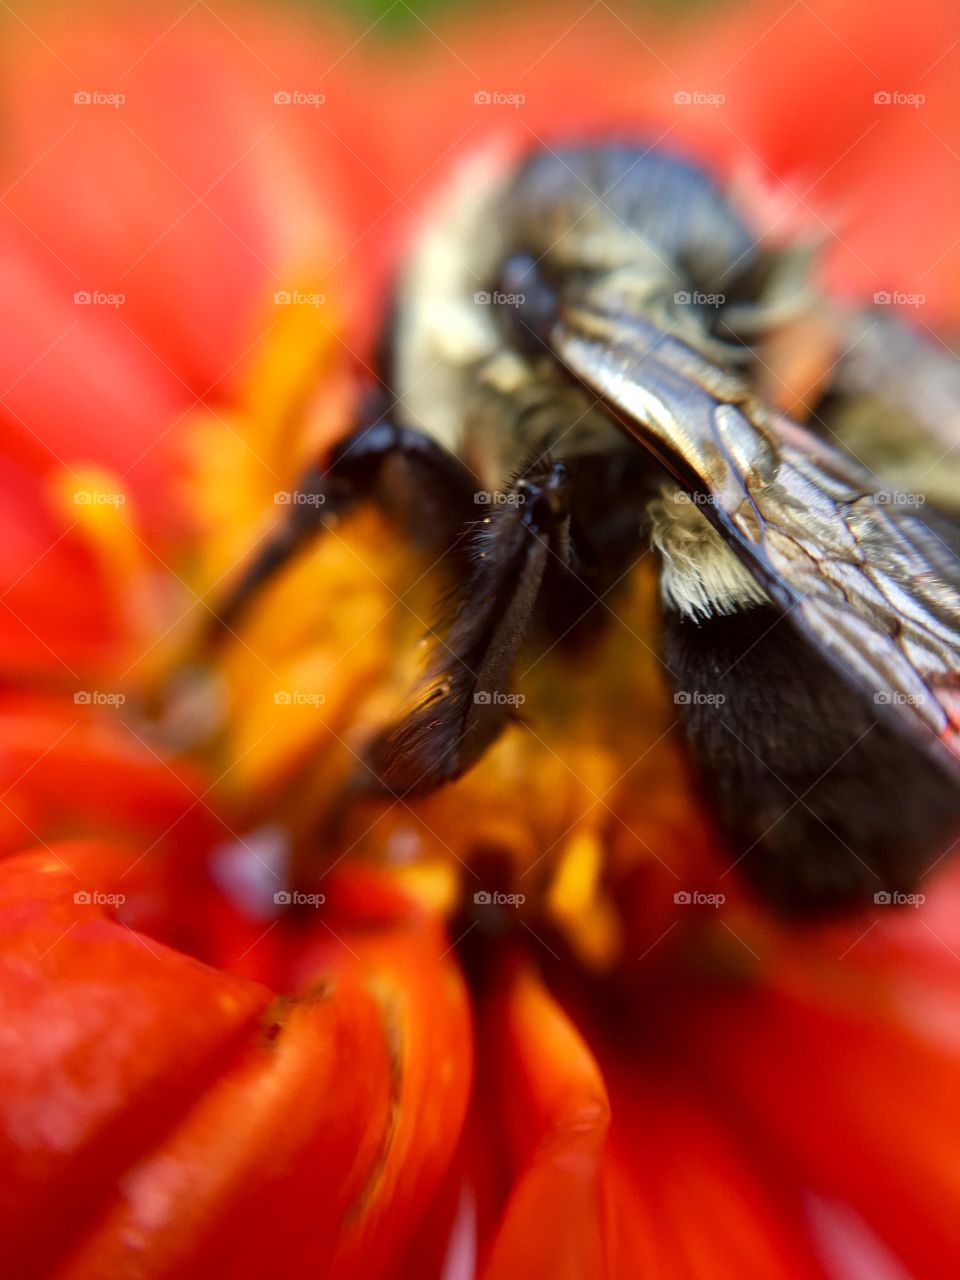 Bee on pistil and yellow stamen of a red flower.